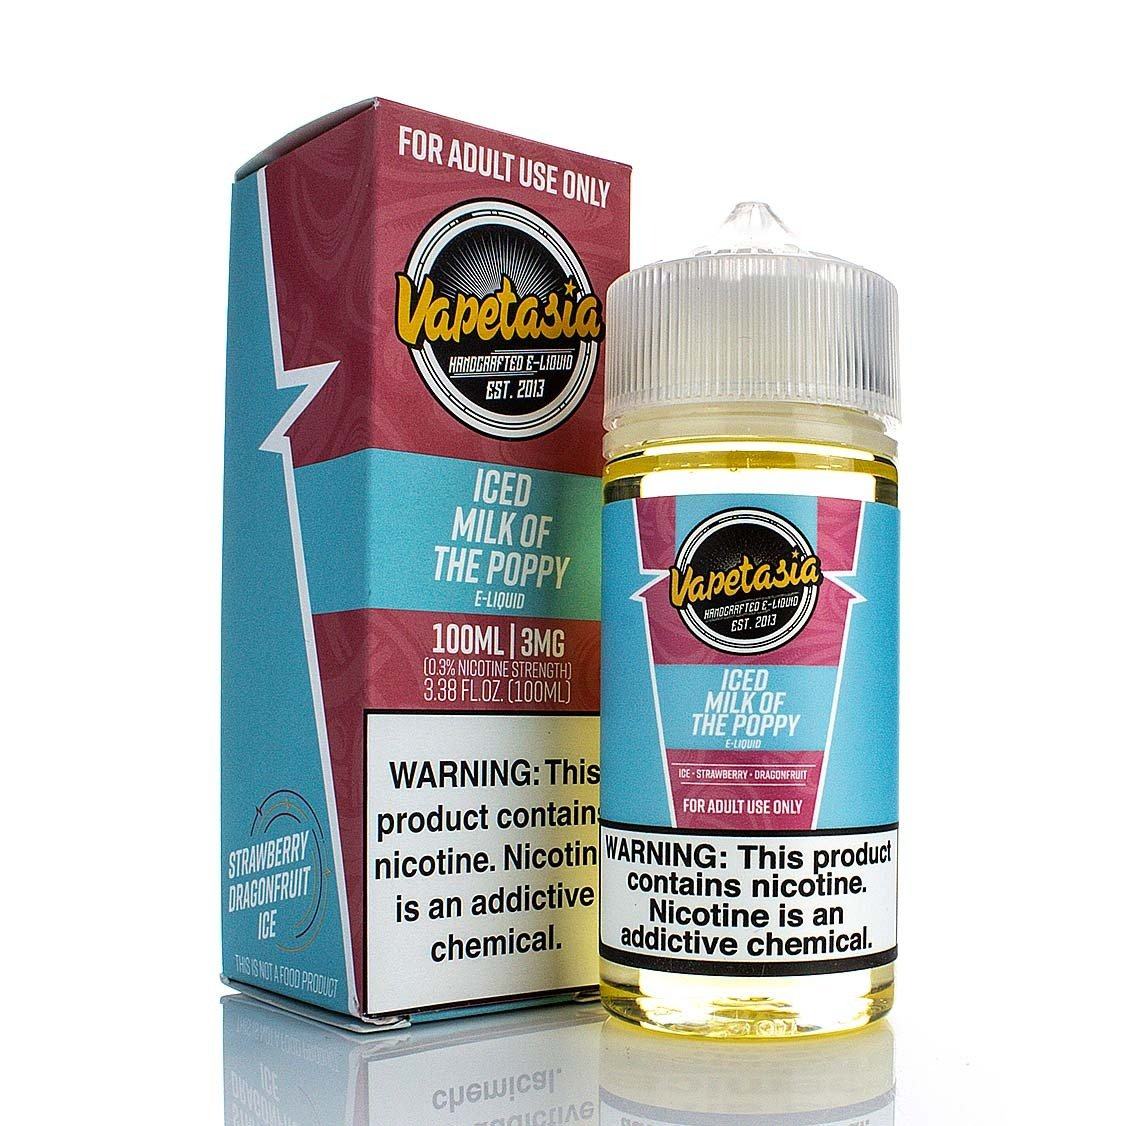 Iced Milk of the Poppy by Vapetasia Series 100ml with Packaging